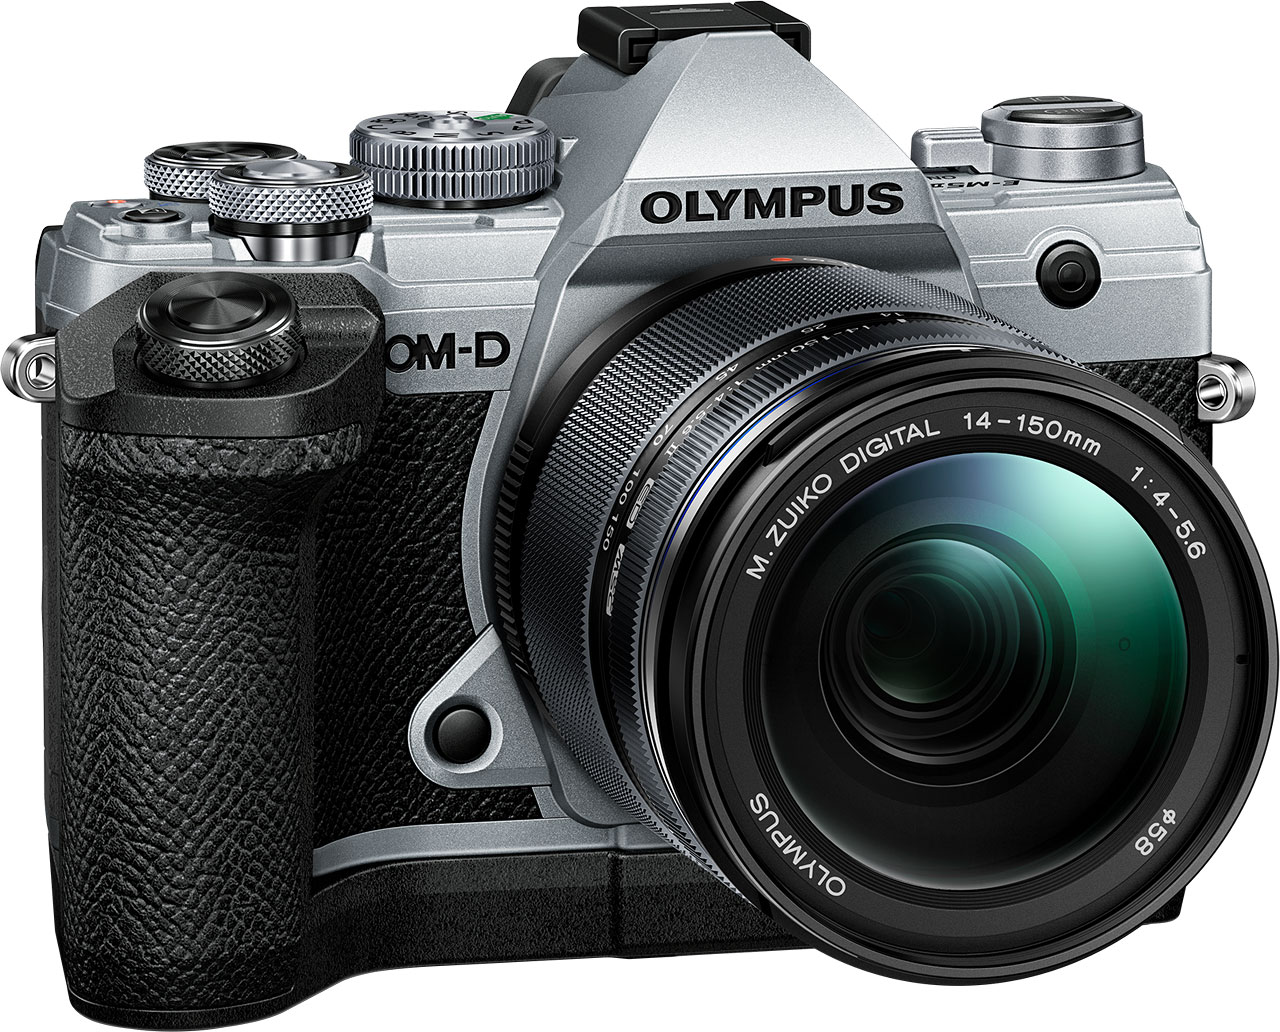 Olympus E-M5 III Review